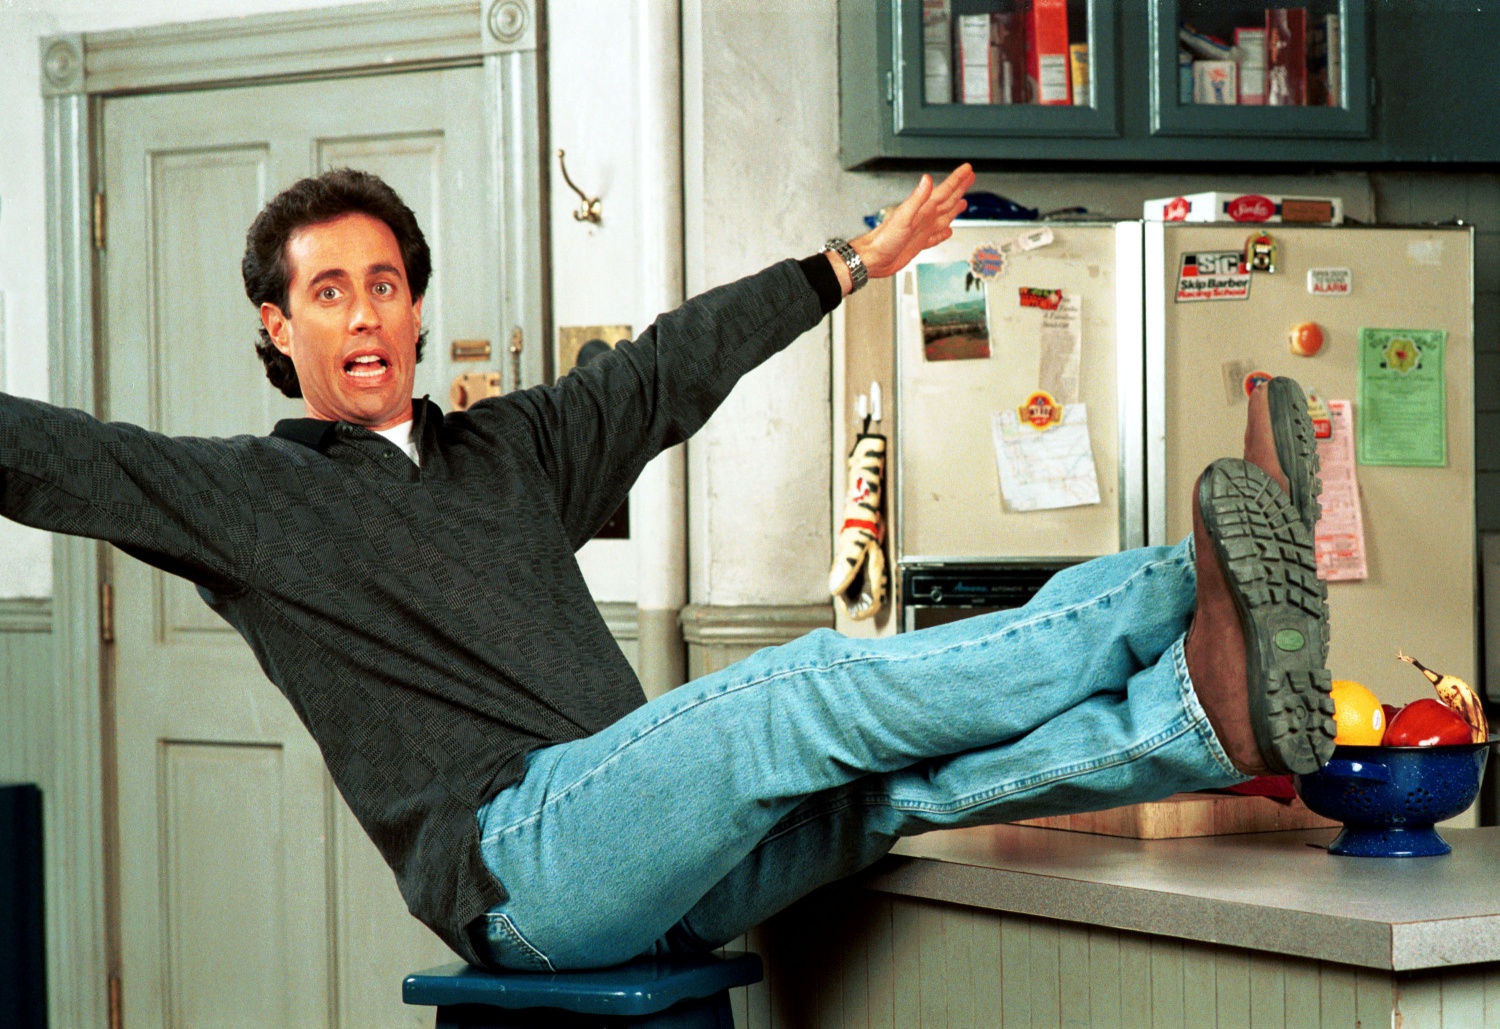 File photo of Jerry Seinfeld taken 11/9/97 on the set where he starred in 'Seinfeld'. in Los Angeles, California 